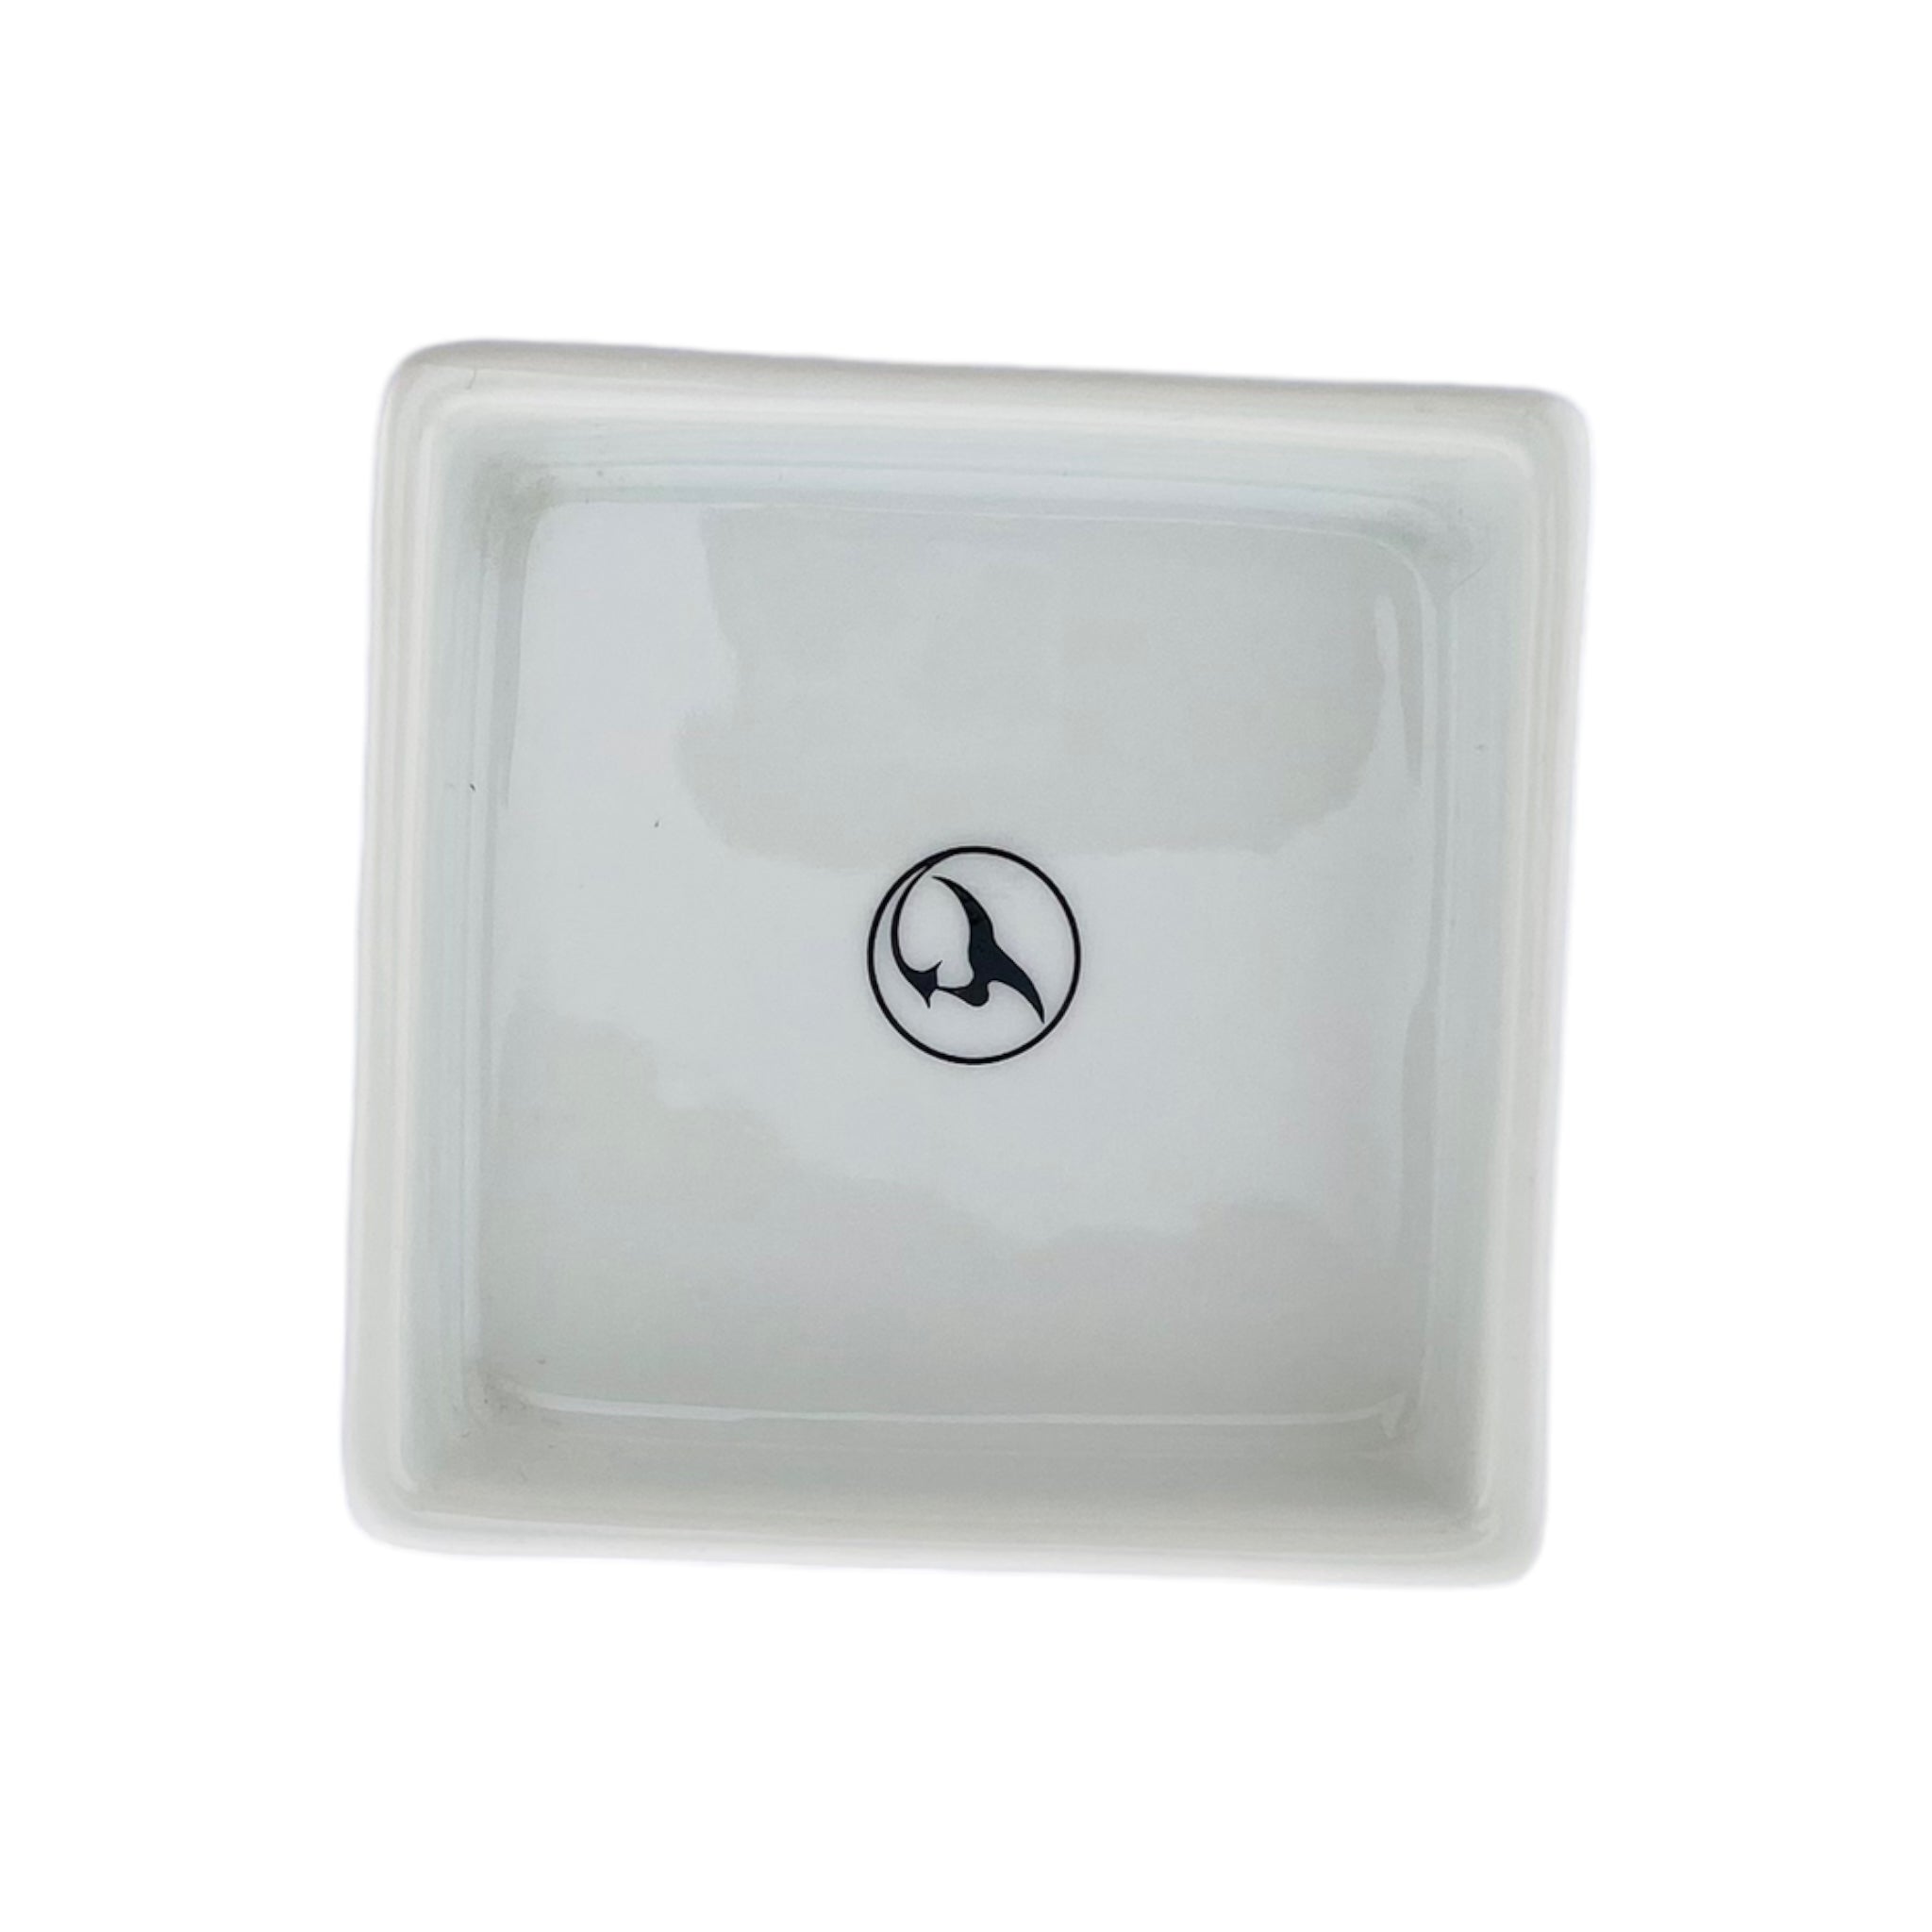 Nectar Collector Square Ceramic Dish best cheap durable portable